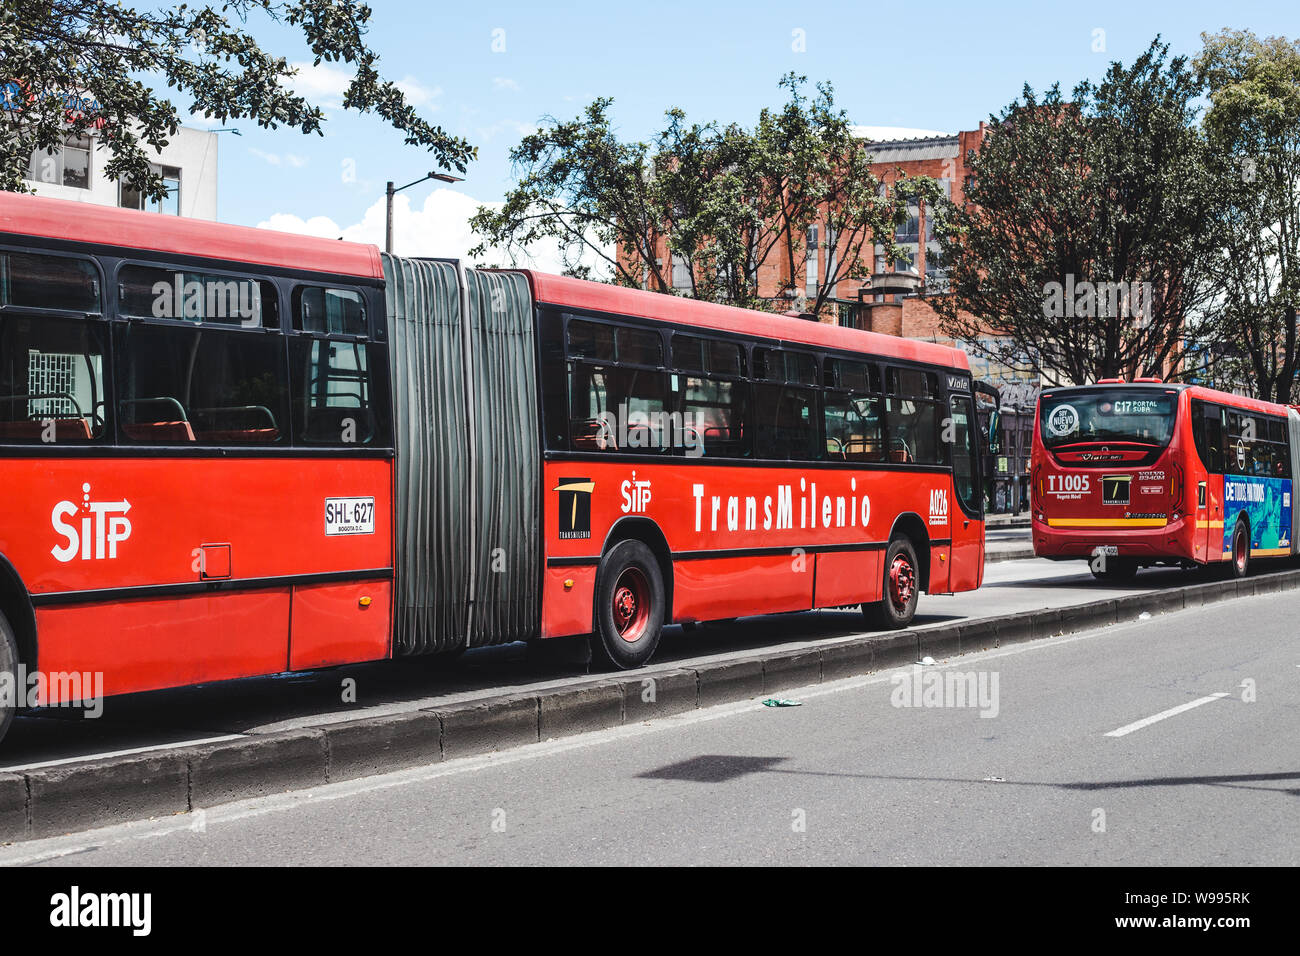 The red Transmilenio public bus system in the bus lane through the center of Bogotá, Colombia's capital city Stock Photo